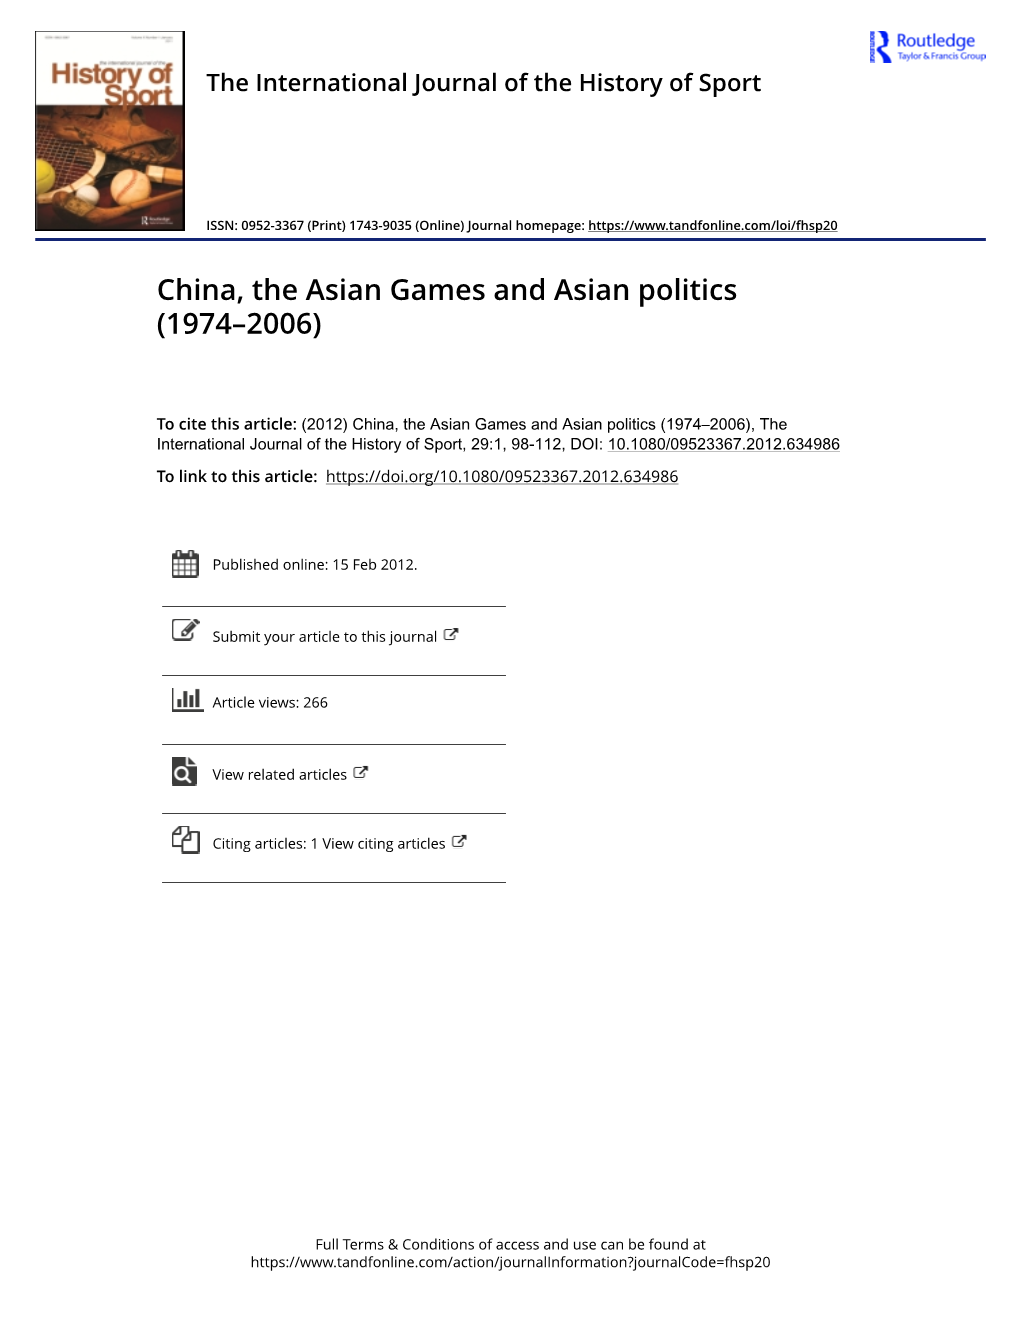 China, the Asian Games and Asian Politics (1974–2006)